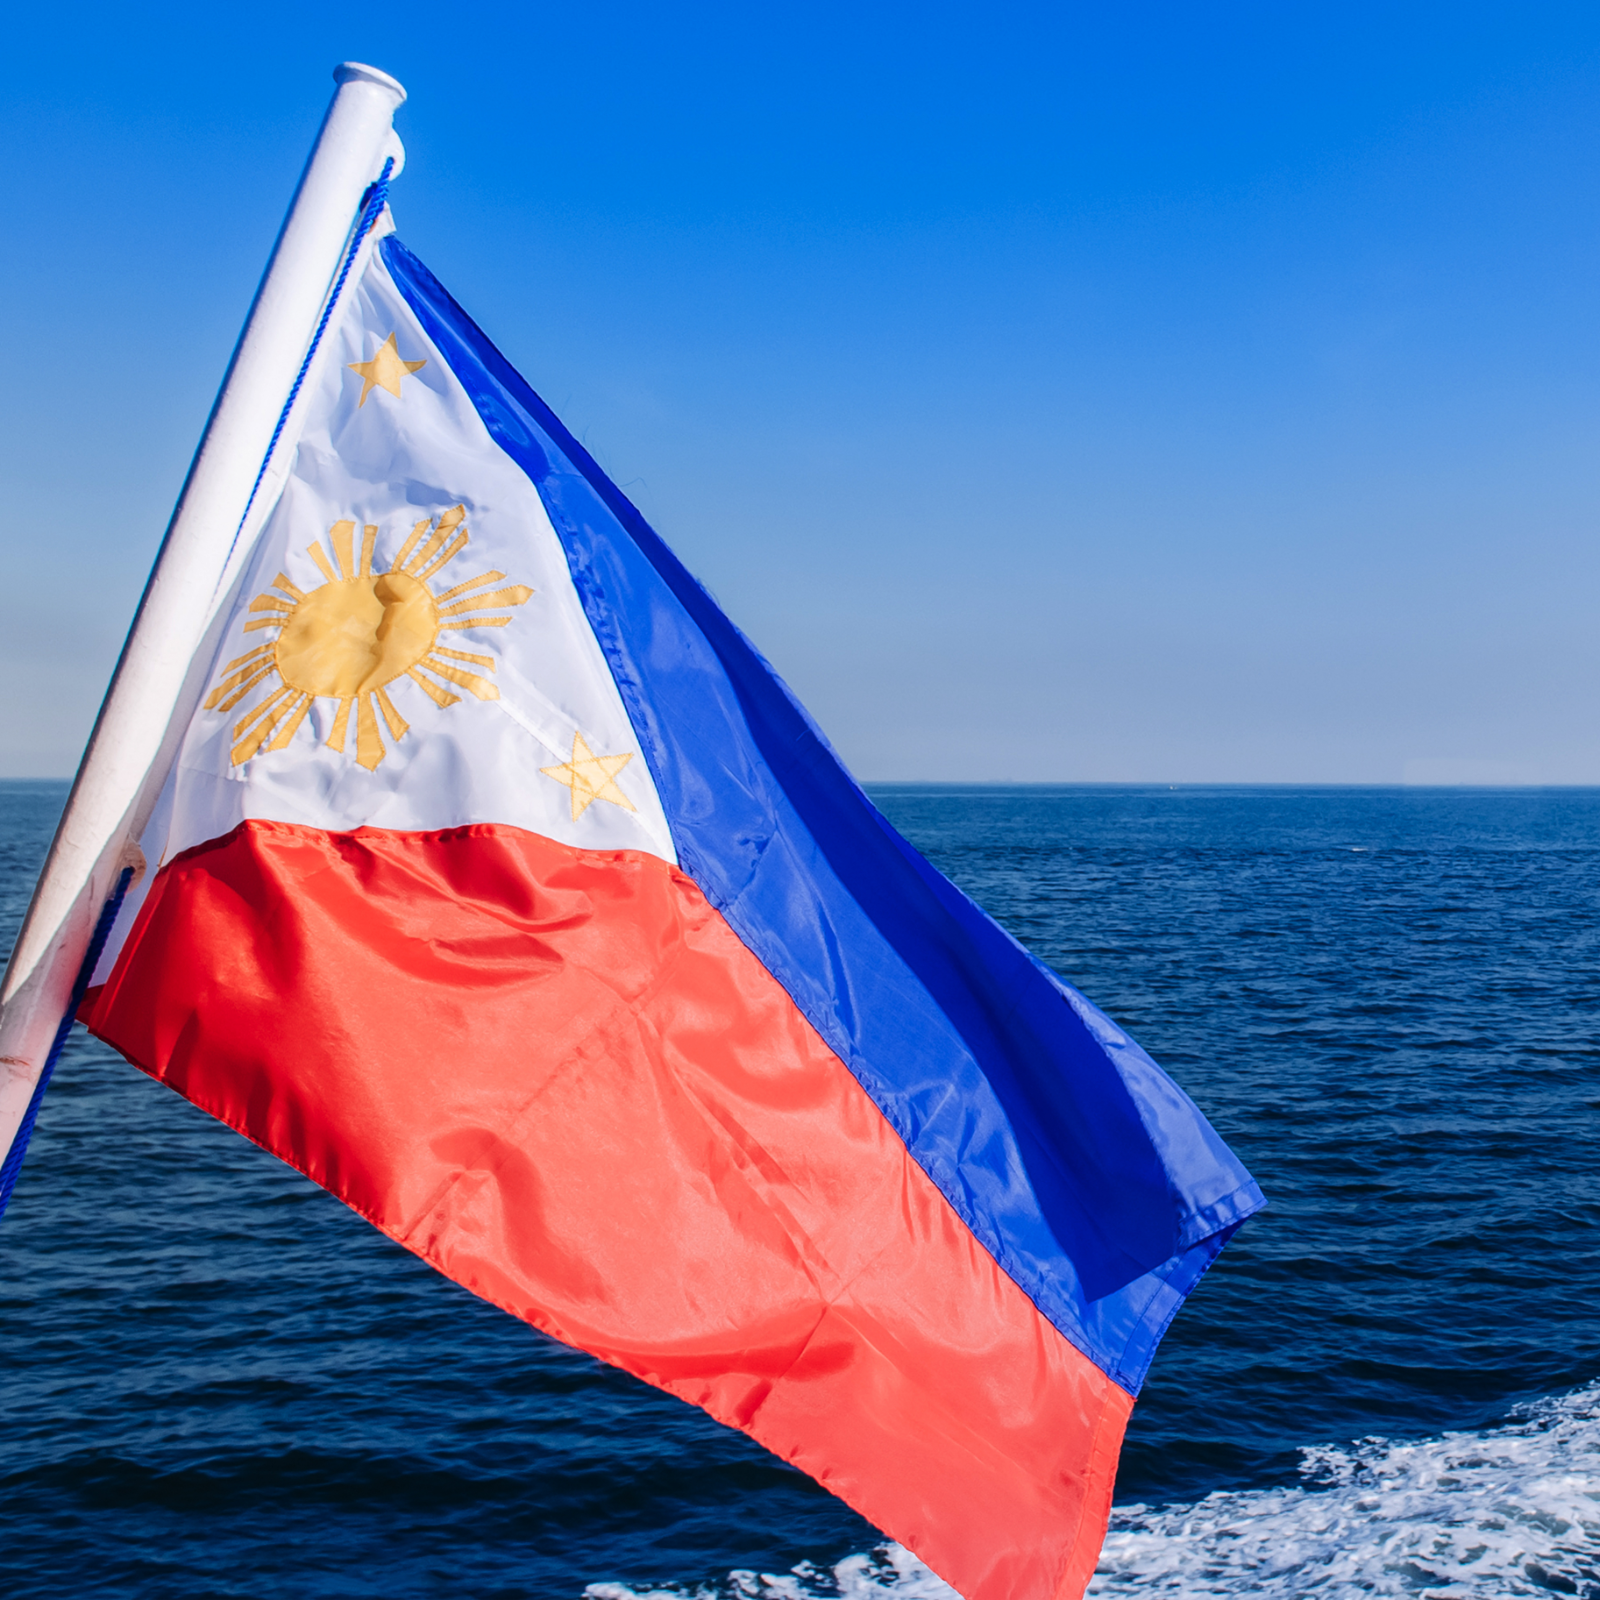 19 Companies Licensed to Operate Crypto Exchanges in Philippines Economic Zone